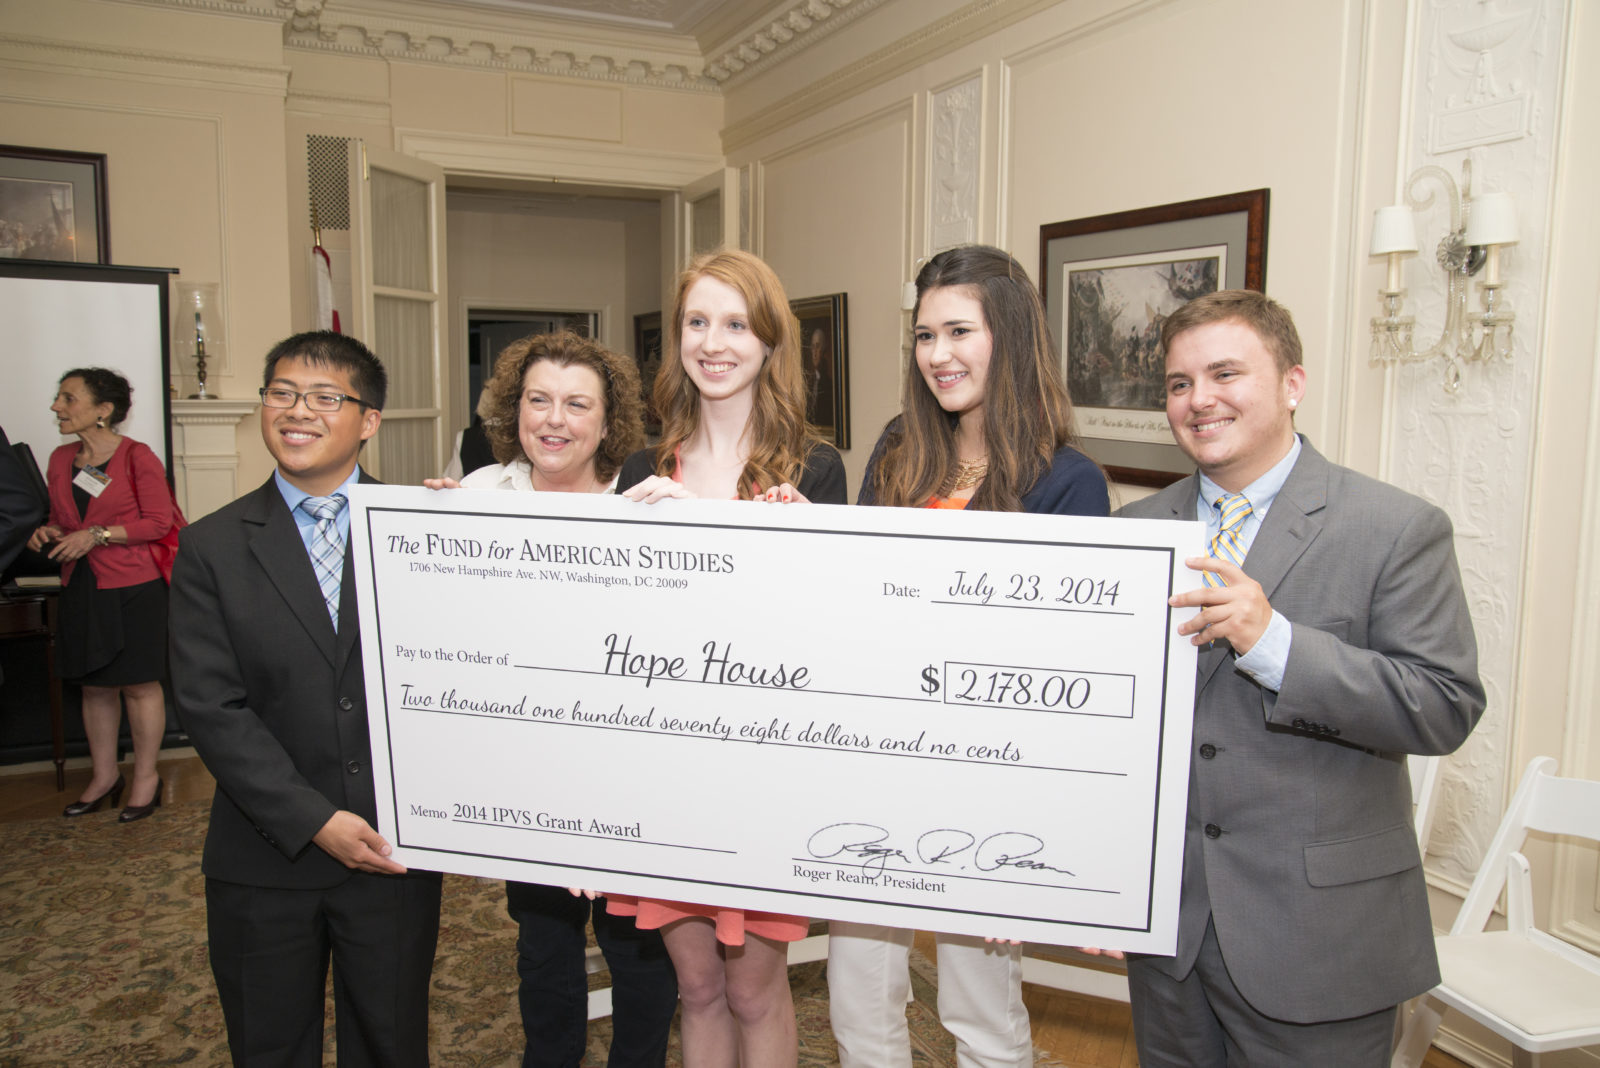 TFAS students from the Institute on Philanthropy and Voluntary Service present a grant to D.C. nonprofit Hope House. During the summer, students raised funds for the grant, reviewed applications from local nonprofits and selected Hope House as the 2014 grantee. 